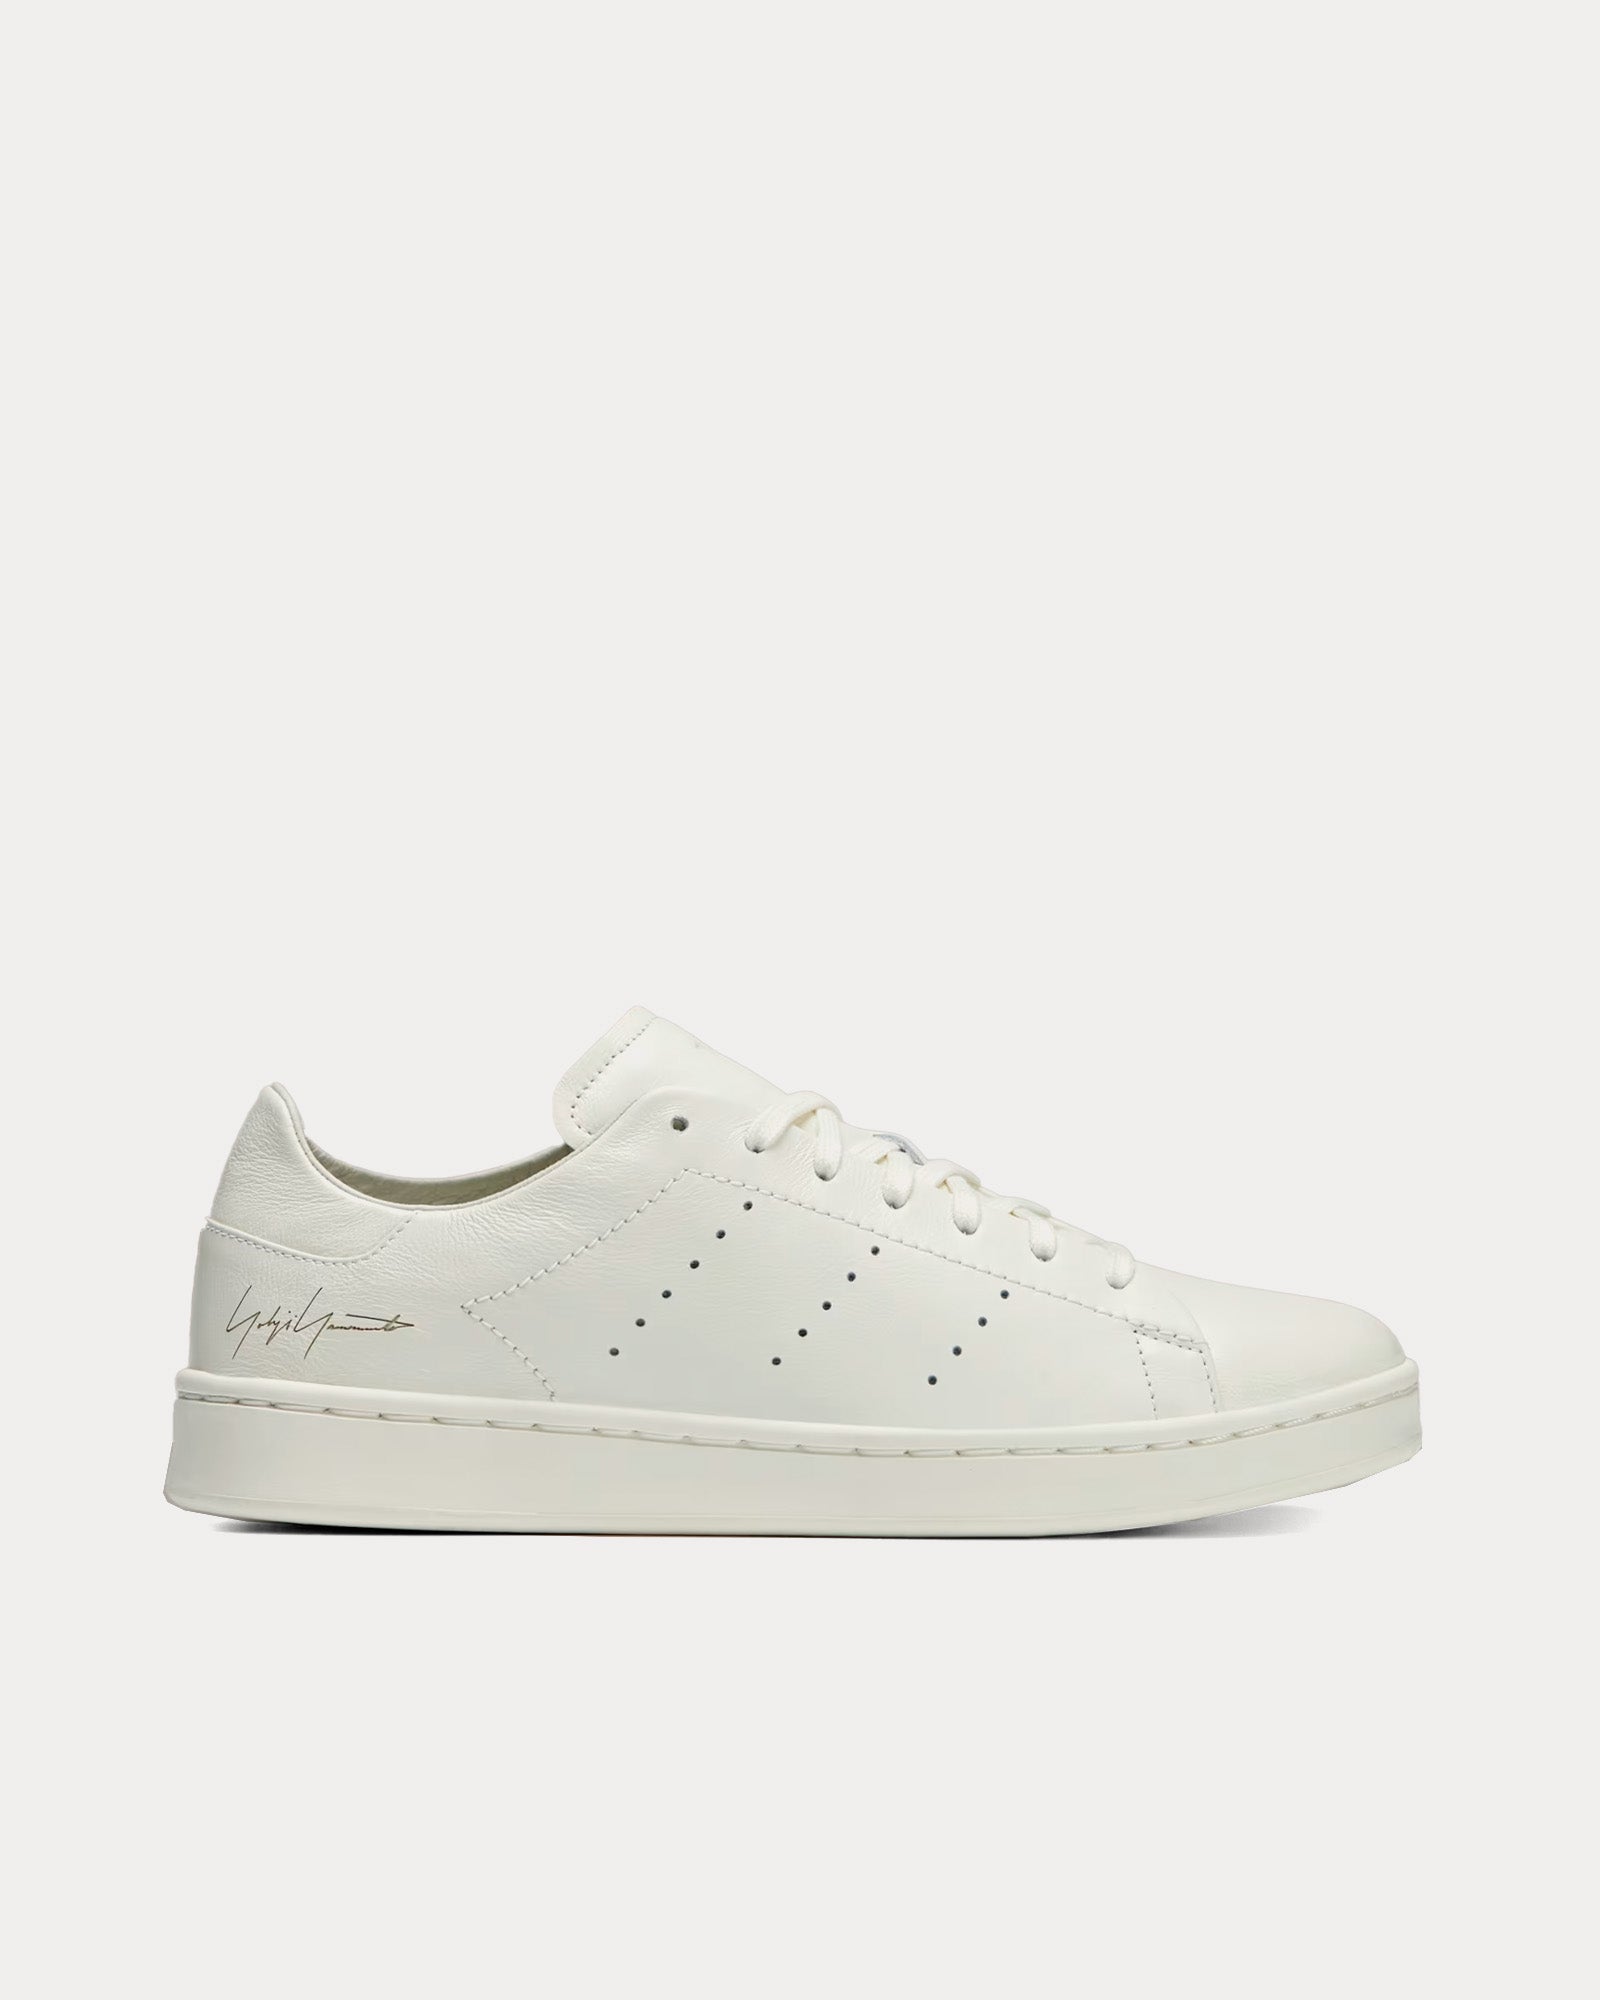 Y-3 - Stan Smith Leather Off White / Off White / Off White Low Top Sneakers